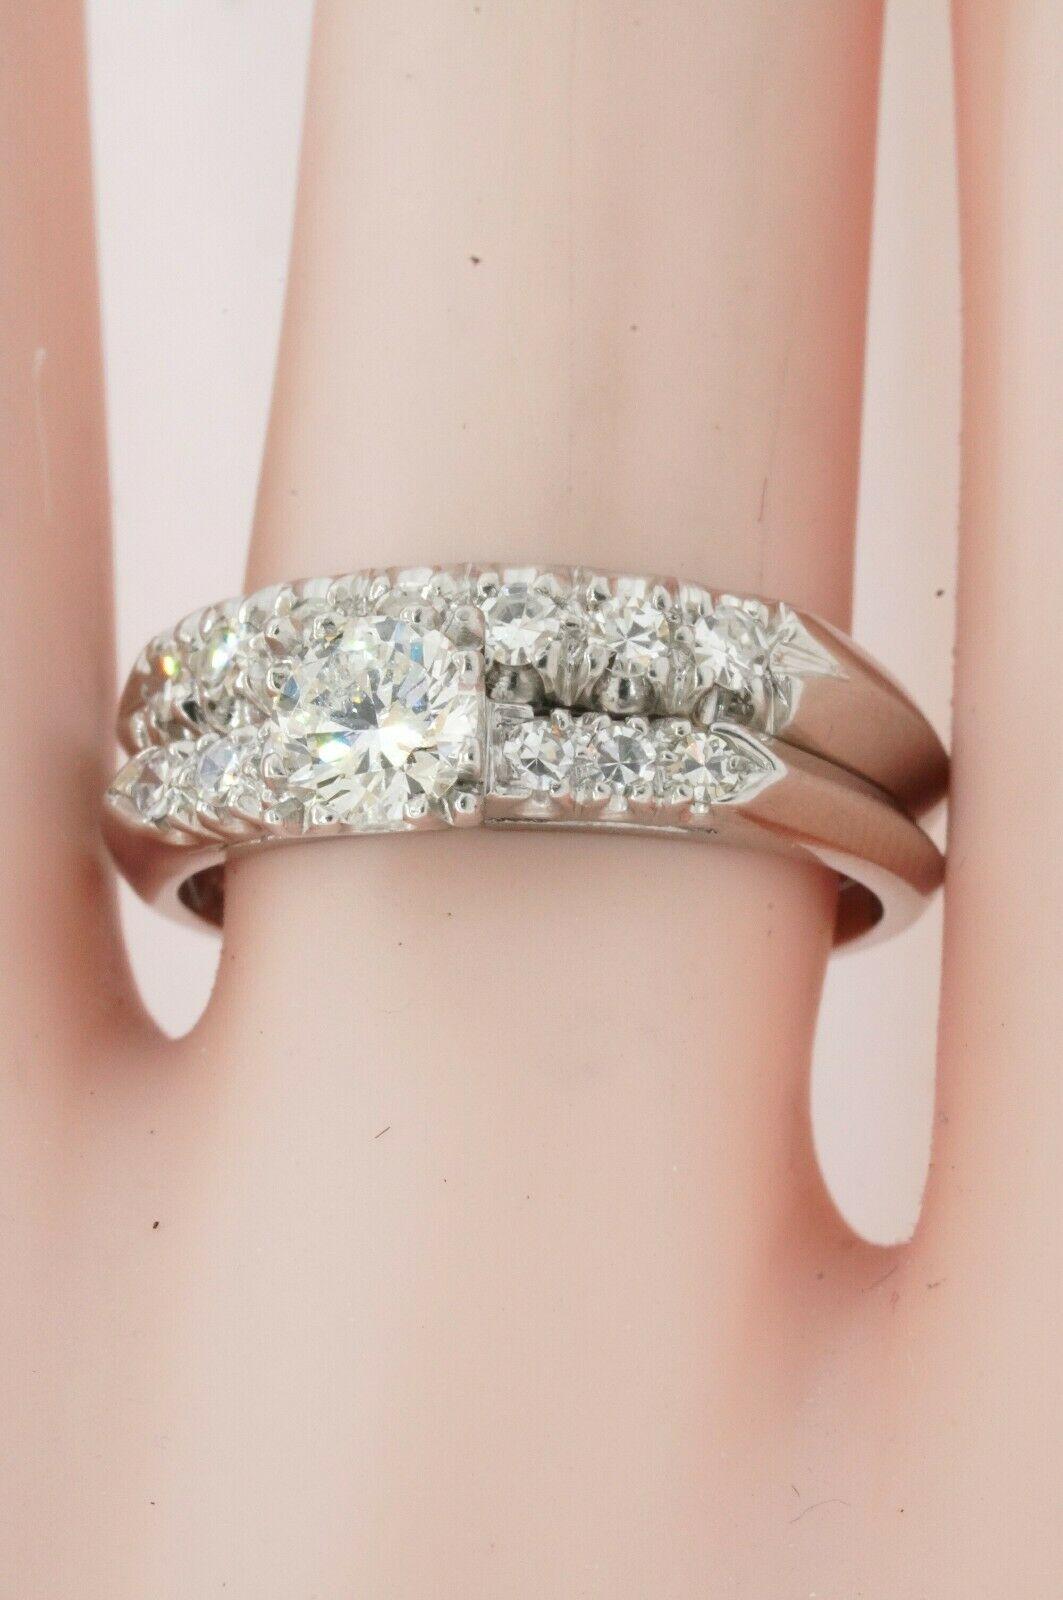 1950's Platinum .95CTW VS diamond bridal/wedding ring set w/ .56CT ctr. size 7.25. This marvelous ring set is crafted in gorgeous Platinum & features 14 Excellent VS-1 clarity/Colorless G color diamonds, with a combined weight of approx. .95CT. This